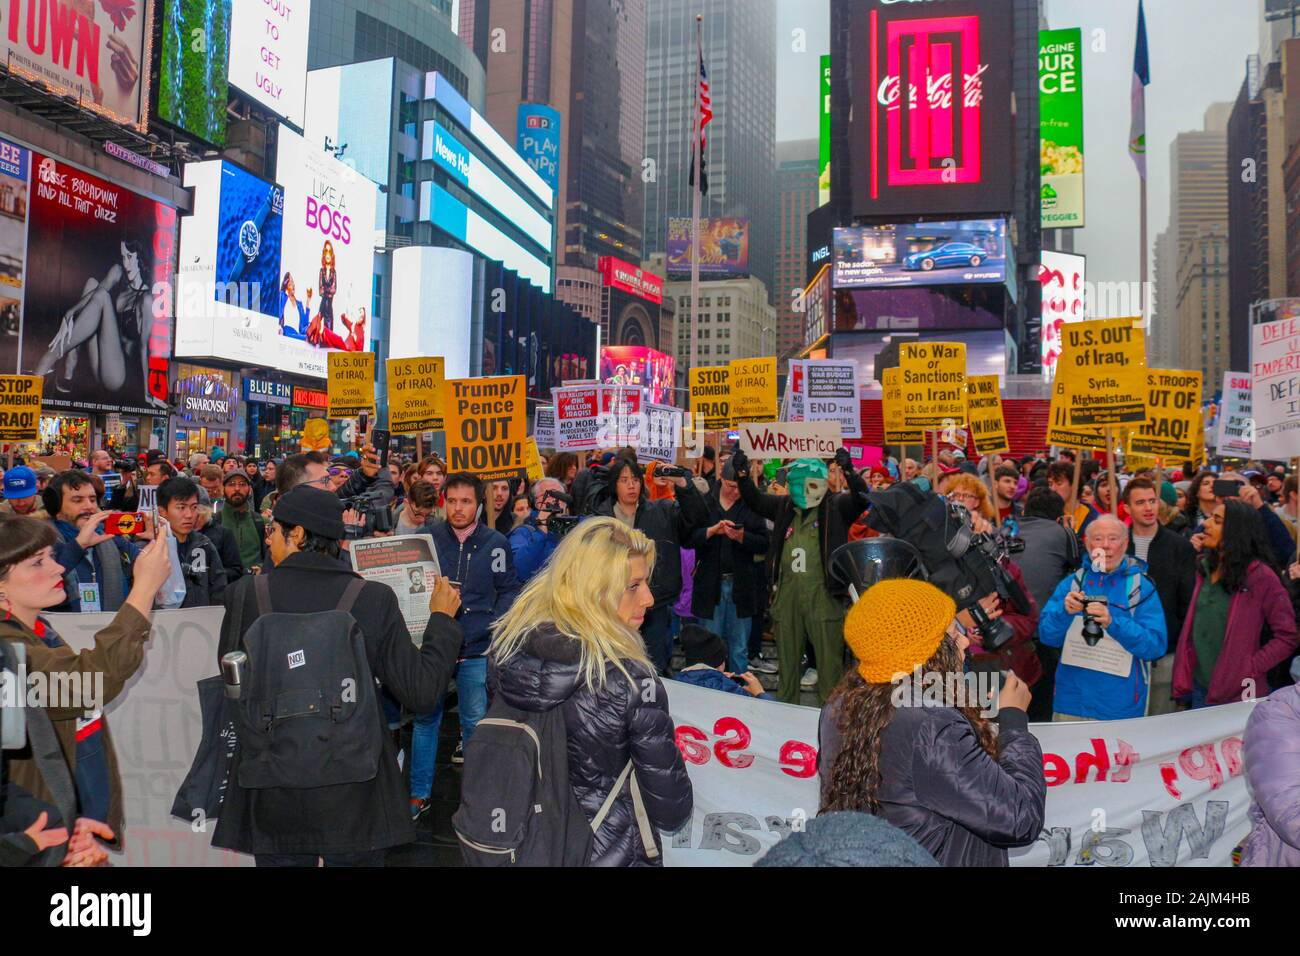 New York, NY – January 04, 2020: Hundreds of people gathered in Times Square in New York City to protest war against Iran & Iraq on January 4th 2020. Stock Photo